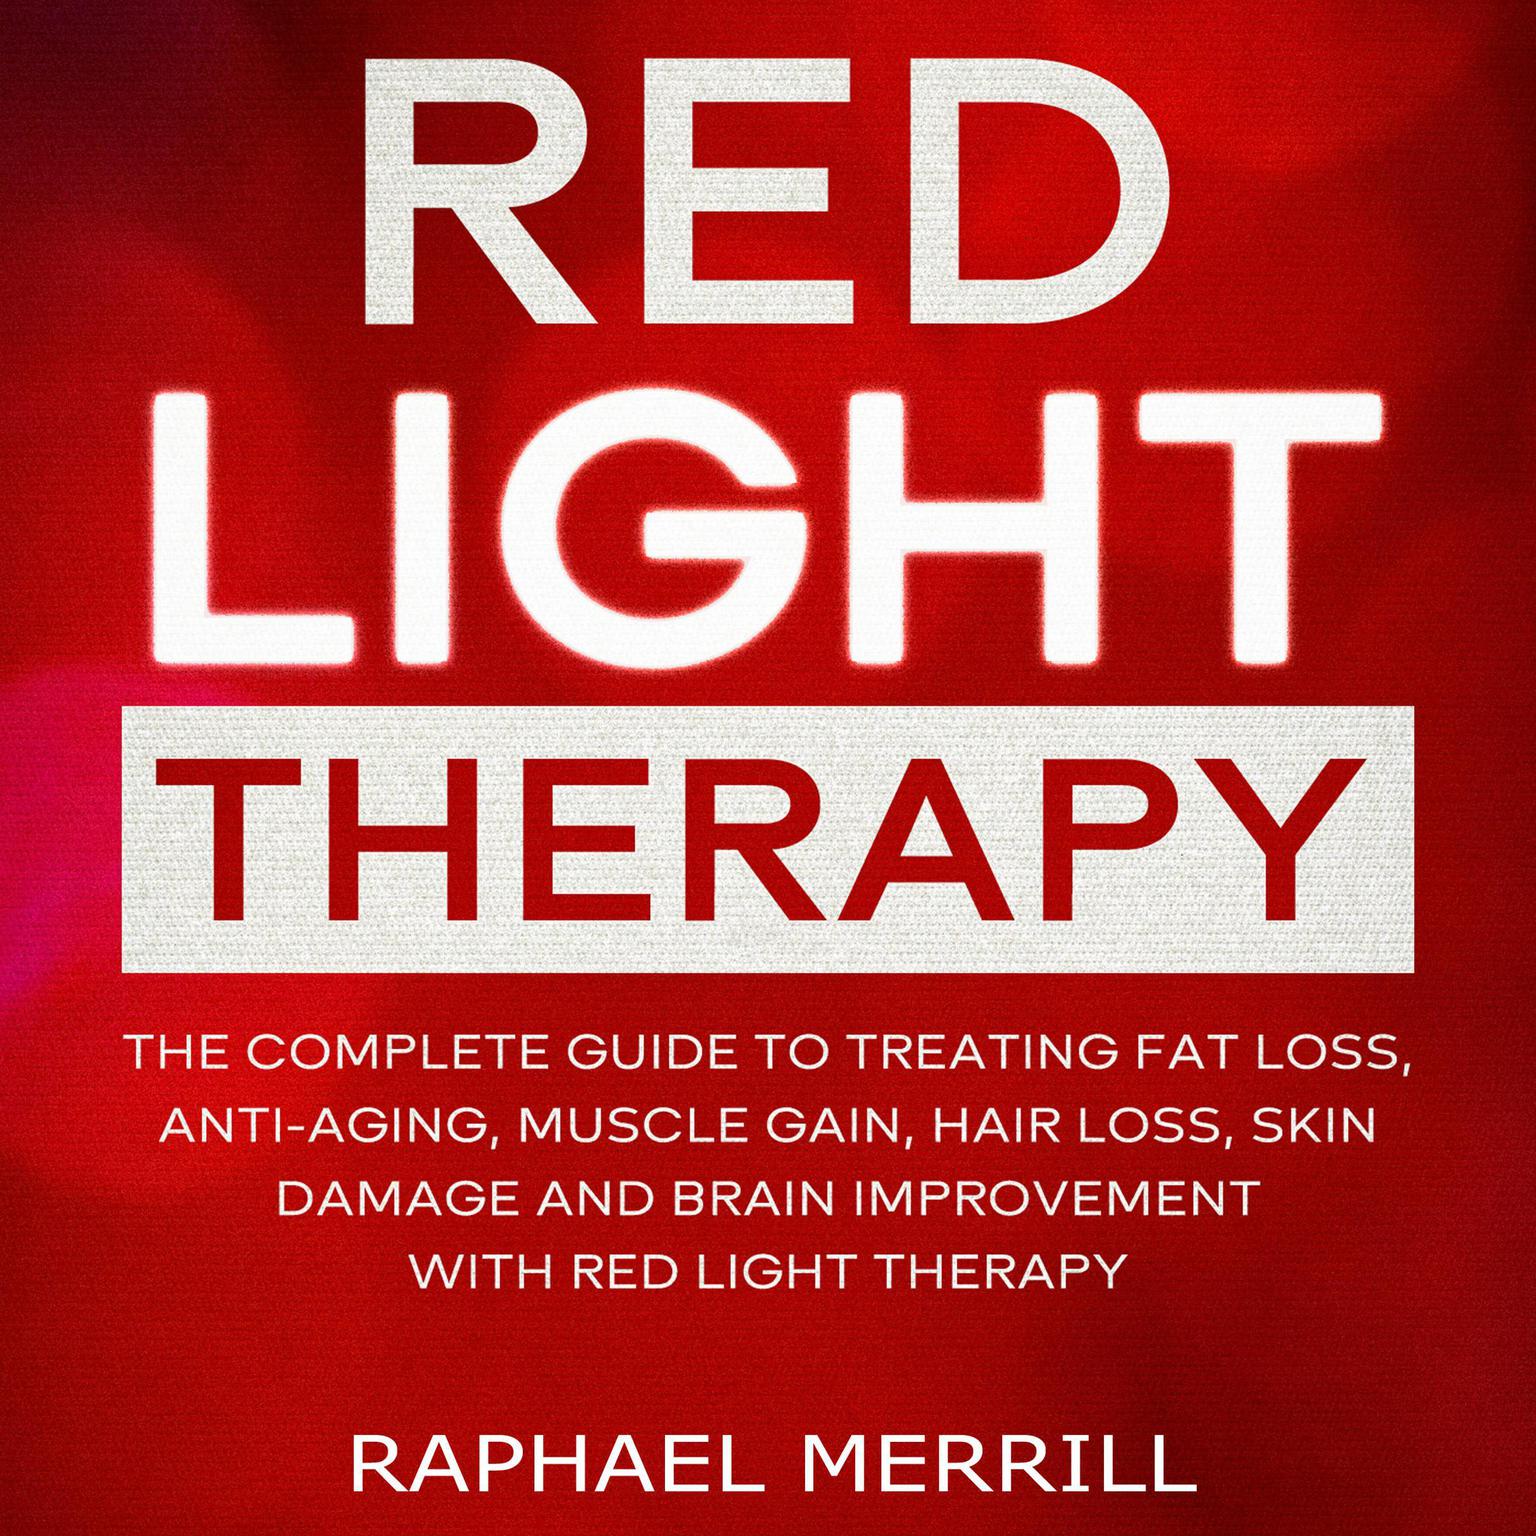 Red Light Therapy: The Complete Guide to Treating Fat Loss, Anti-Aging, Muscle Gain, Hair Loss, Skin Damage and Brain Improvement With Red Light Therapy Audiobook, by Raphael Merrill